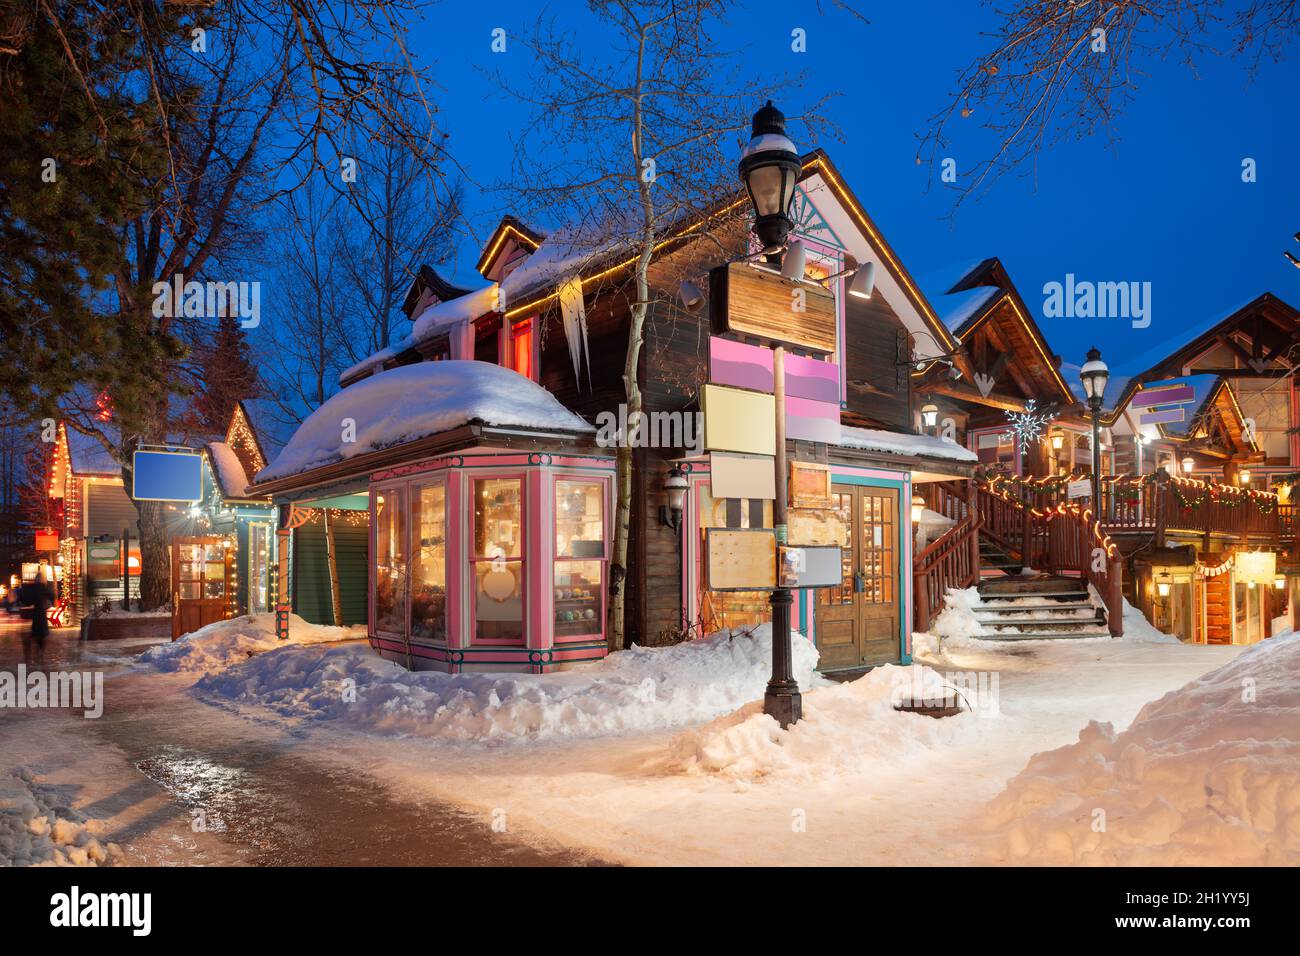 Breckenridge, Colorado, USA downtown streets at night in the winter with holiday lighting. Stock Photo